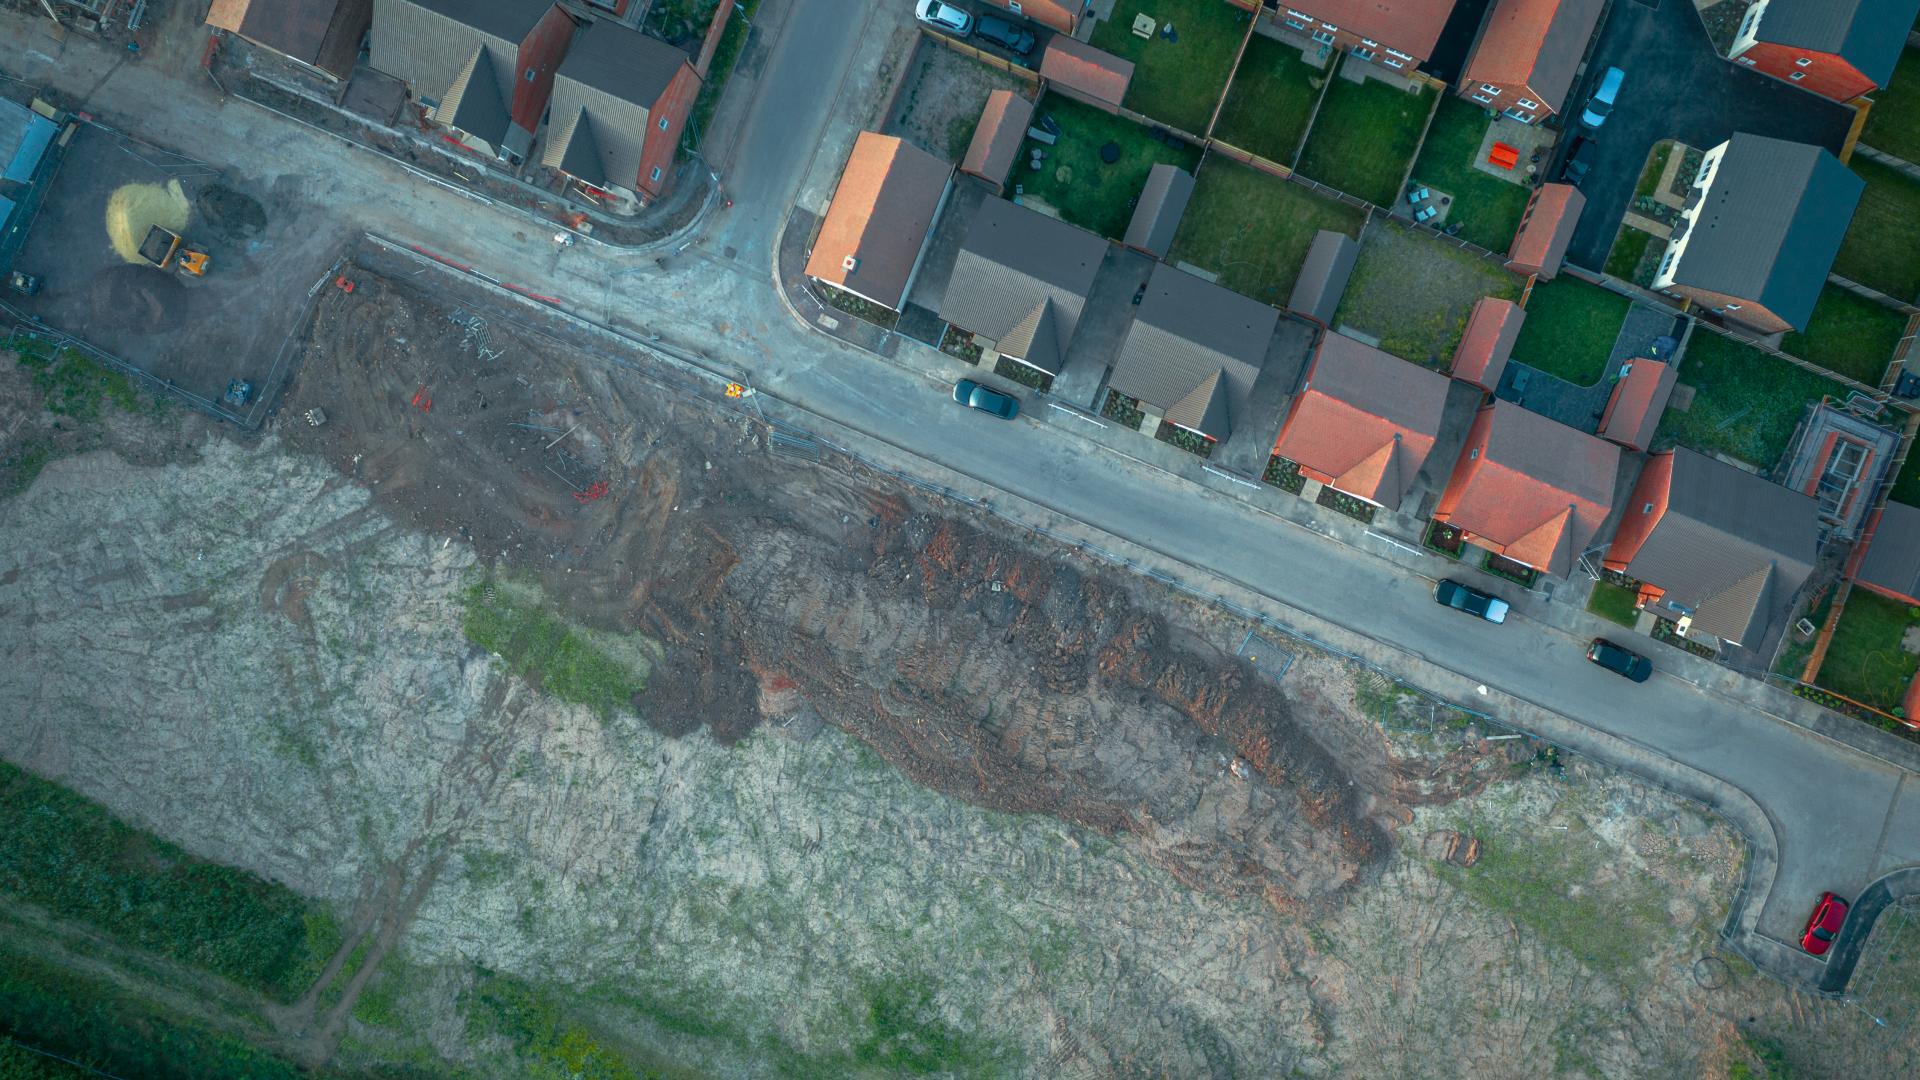 Aerial Image of Houses next to a development site